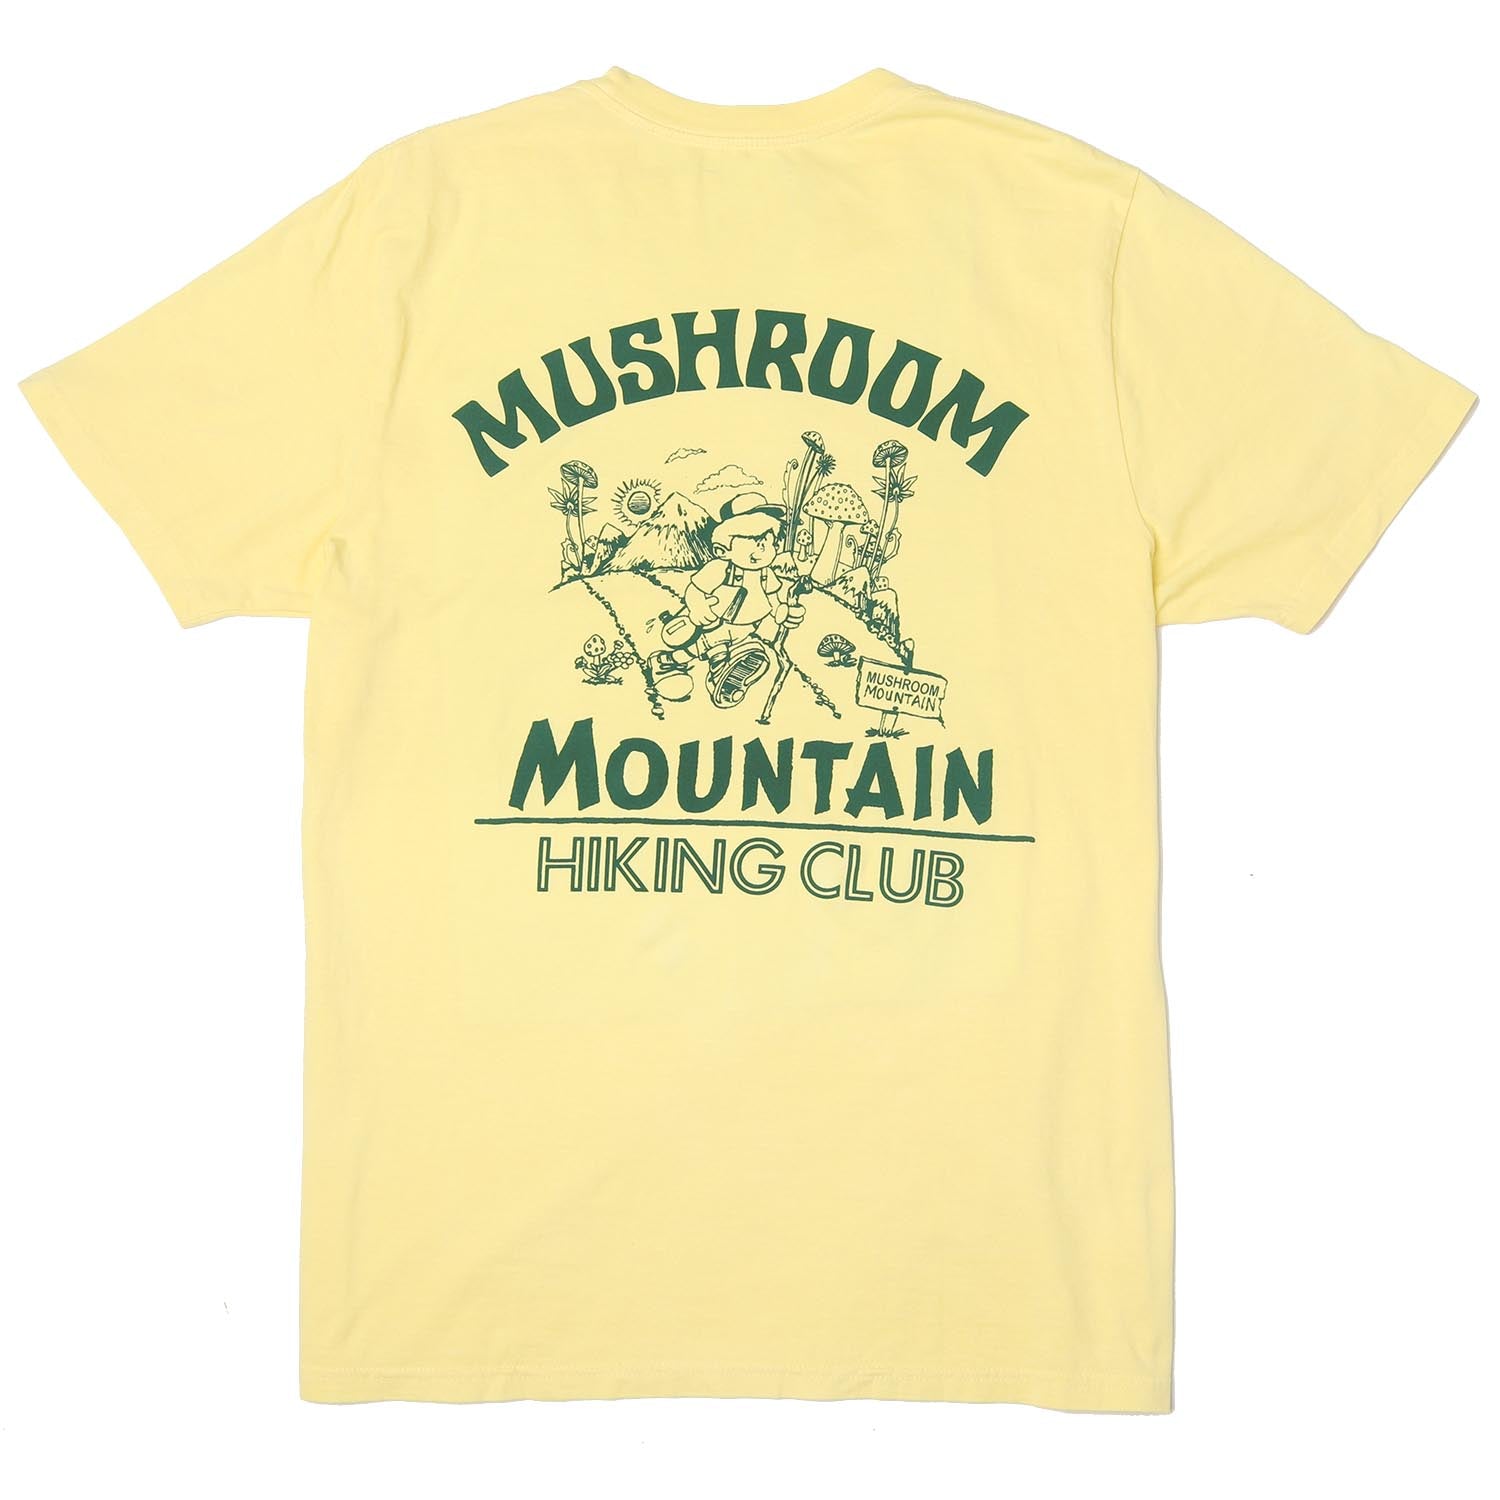 Mushroom Mountain graphic tee printed on front and back